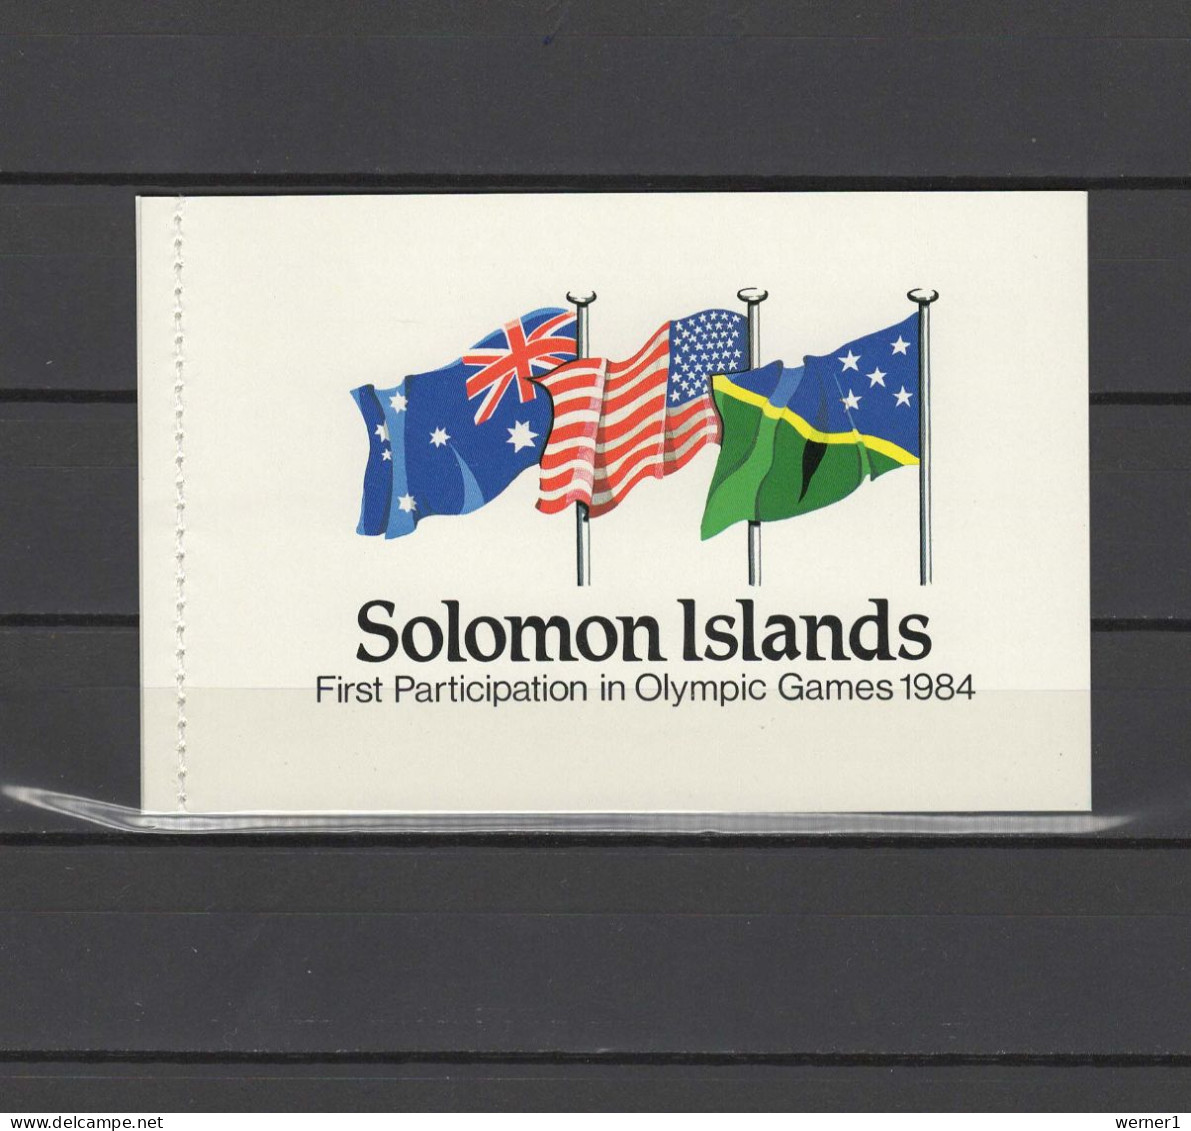 Solomon Islands 1984 Olympic Games Los Angeles Stamp Booklet MNH - Zomer 1984: Los Angeles